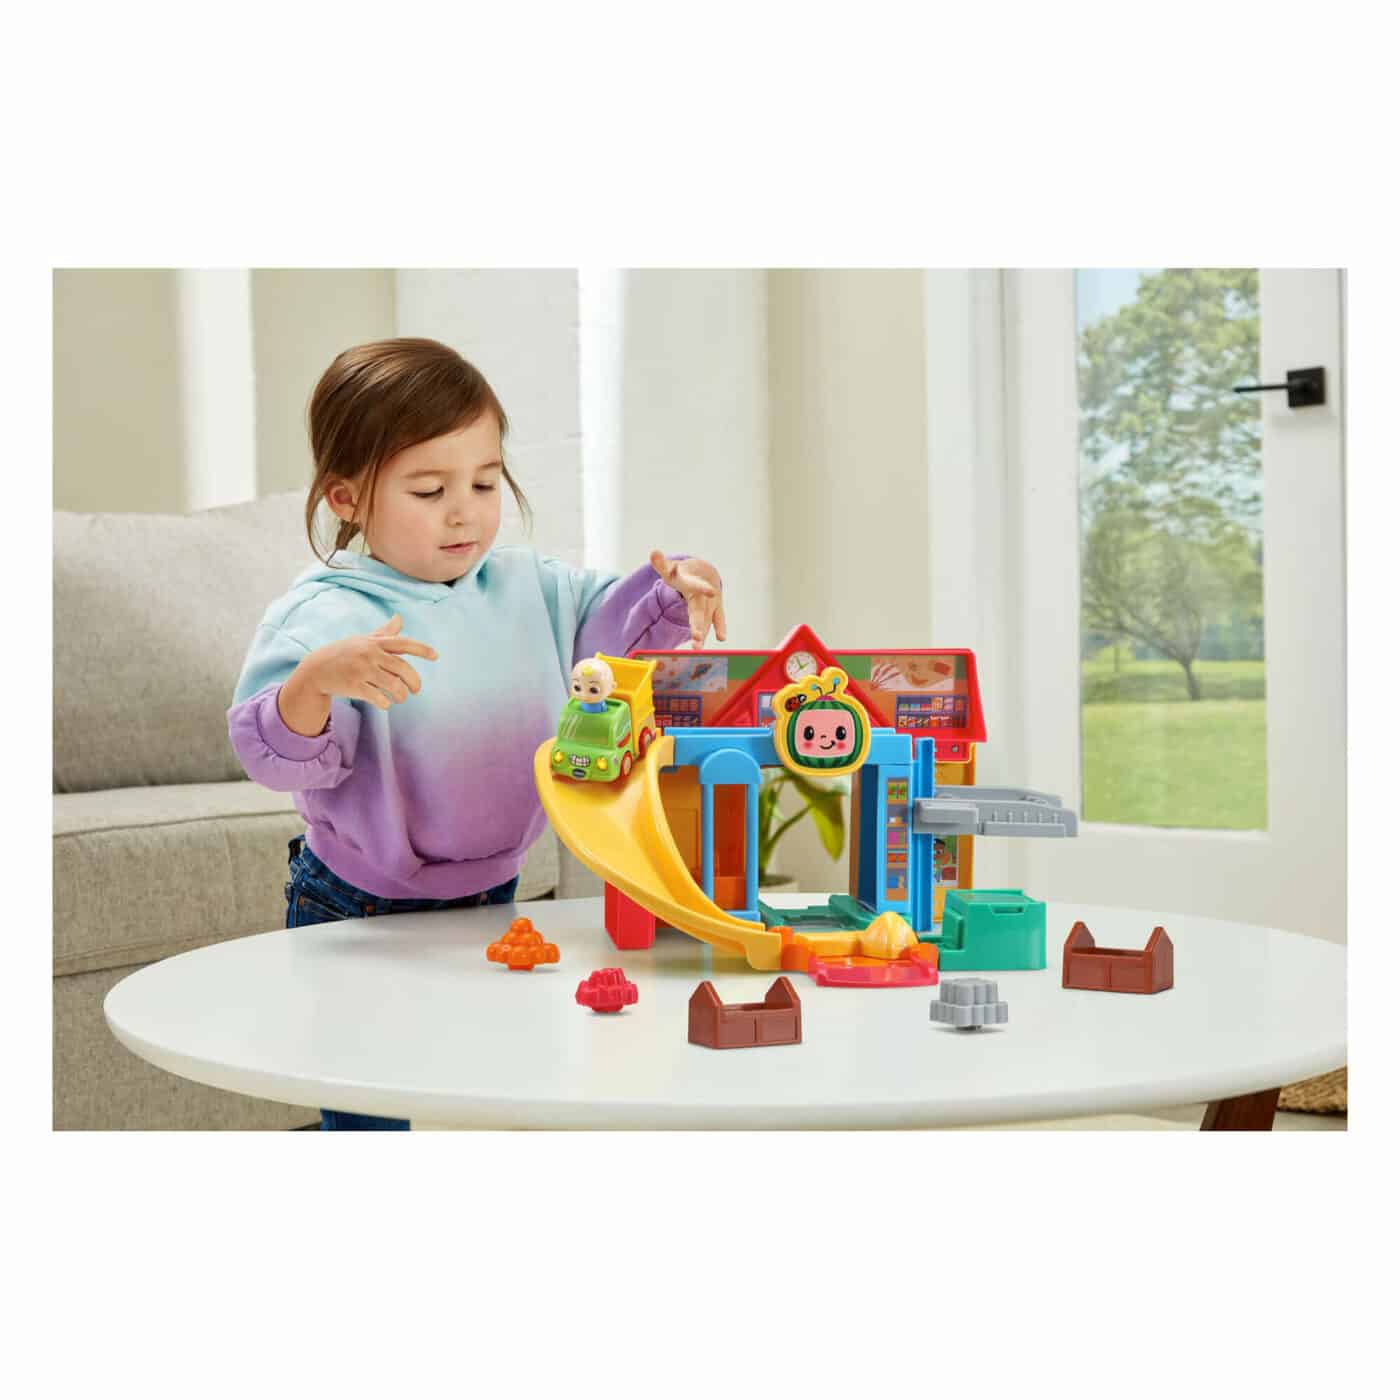 Vtech - Toot Toot Drivers Cocomelon - Grocery Store Track Set4